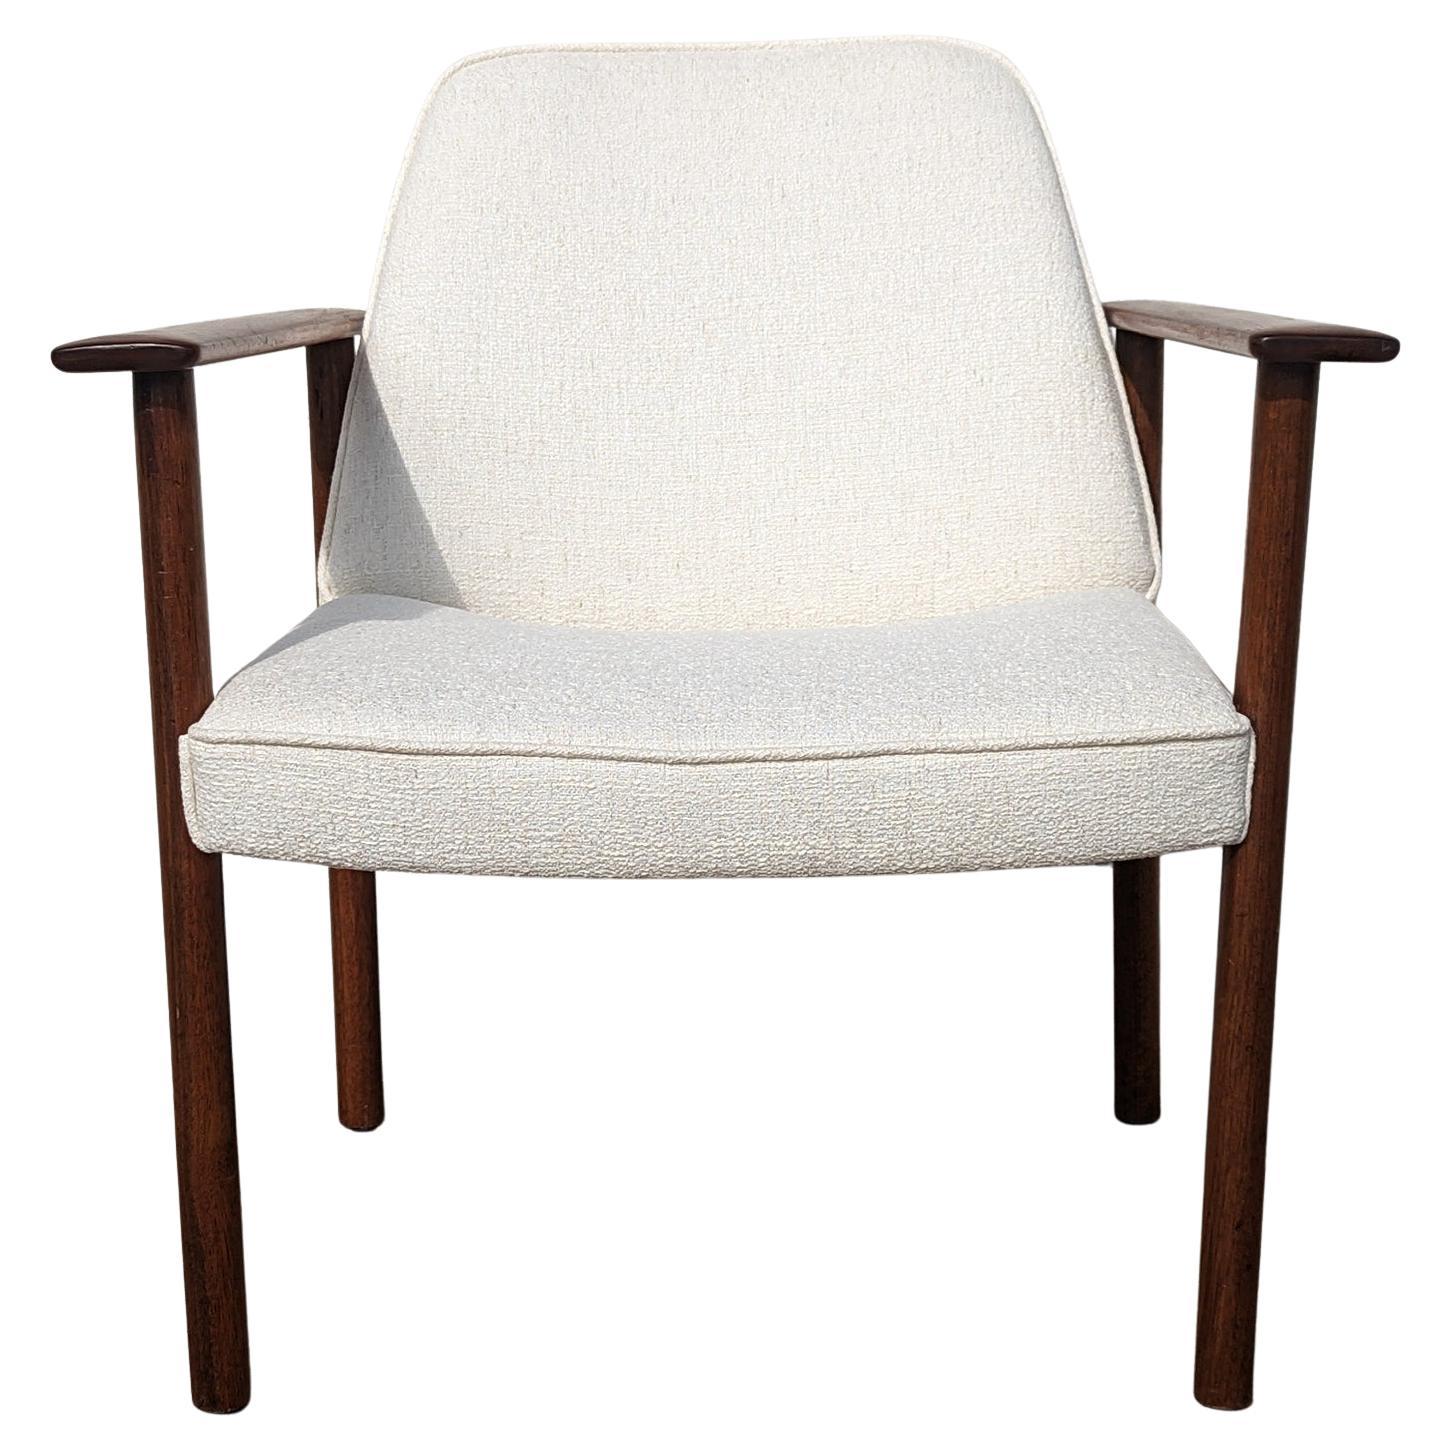 Mid Century Danish Modern Dokka Mobler Side Chair

Above average vintage condition and structurally sound. Has some expected slight finish wear and scratching on frame. Upholstery and seat straps are new. Outdoor listing pictures might appear